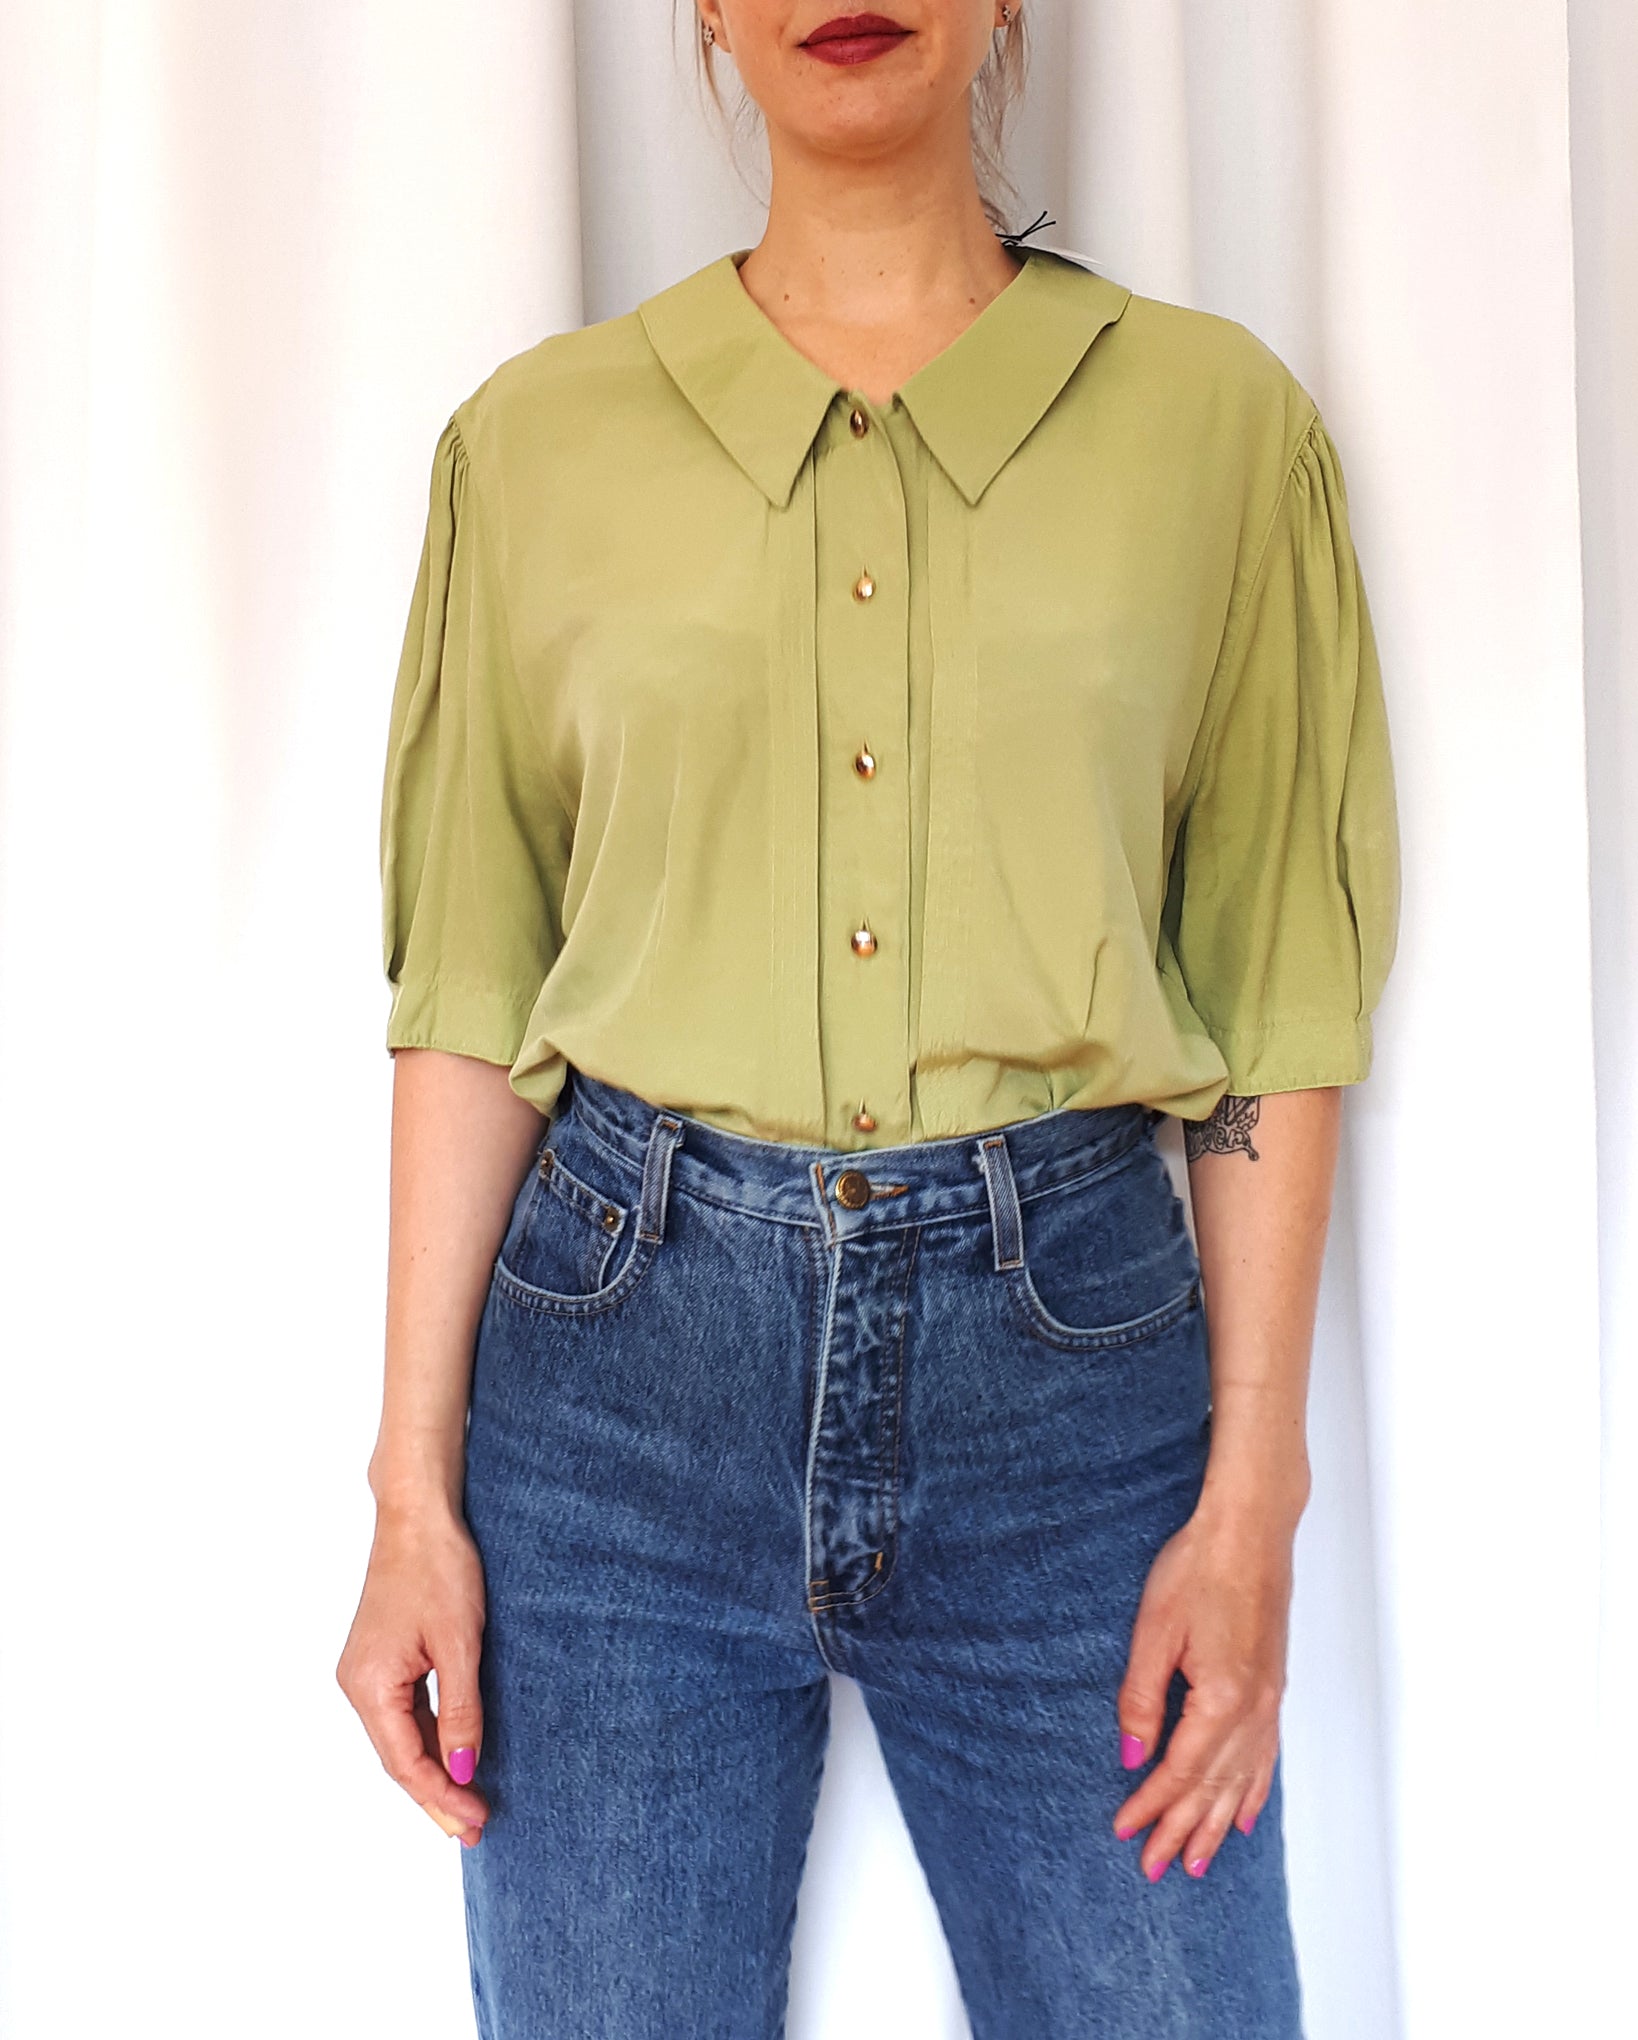 Vintage Moss Green Blouse With Peter Pan Collar and Puffy Sleeves